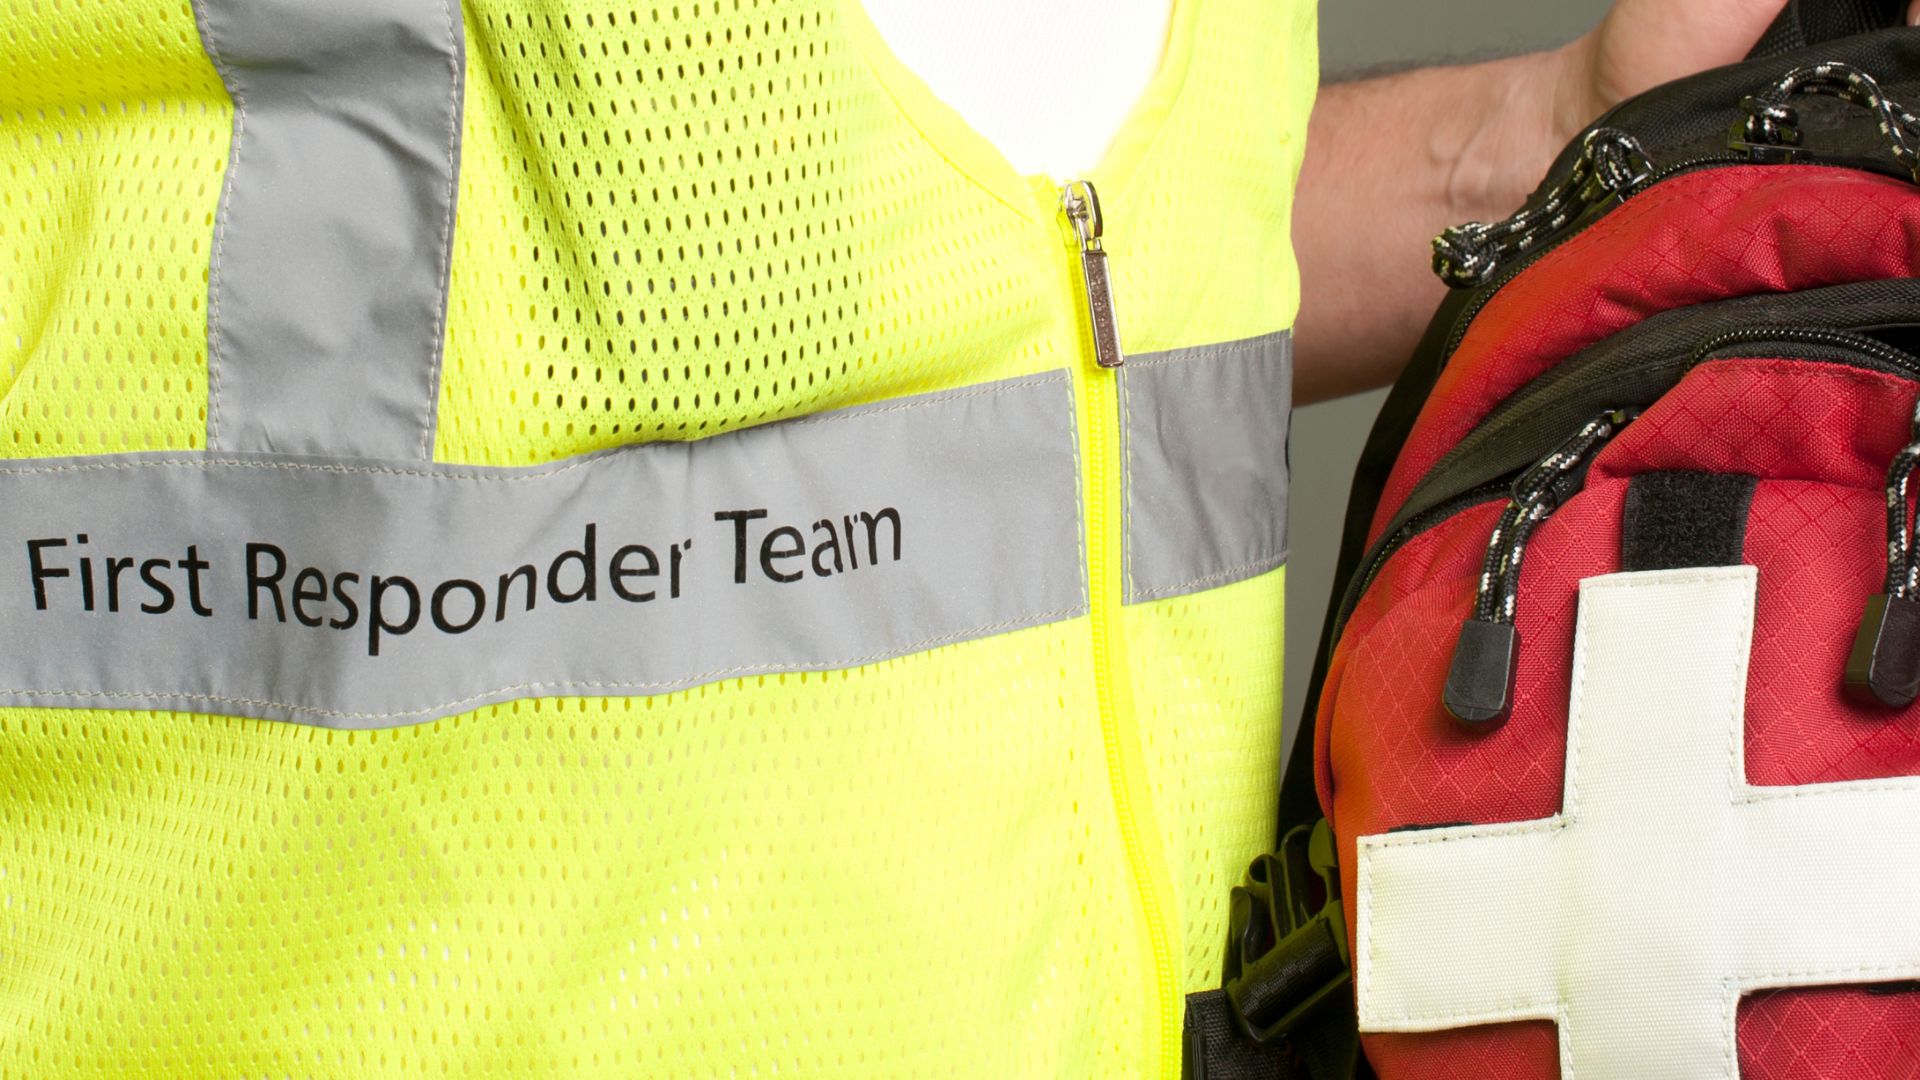 Understanding the Roles of First Responders and AEDs